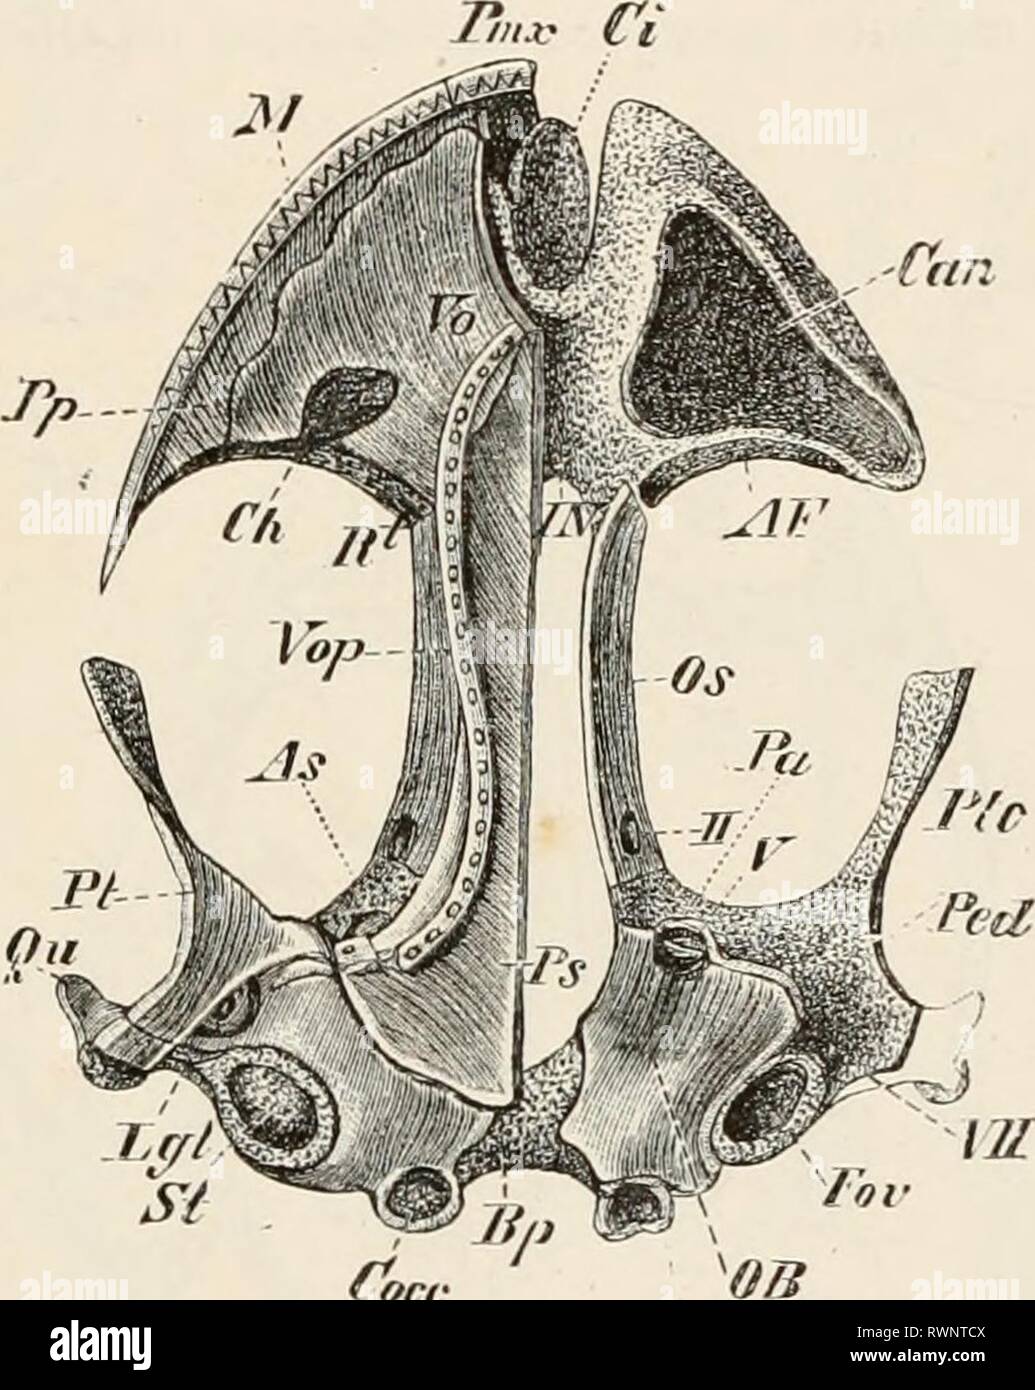 Elements of the comparative anatomy Elements of the comparative anatomy of vertebrates elementsofcompar00wied Year: 1886  Cvcc Fin. 56.—SKULL OF A YOUNG .AxuLOTL. (Ventral view.) T,    face Osp FIG. 57.—SKULL OF Salamandra atra (ADULT.) (Dorsal view.) ft fore FIG. 58.—SKULL OF Salamandra atra (ADULT). (Ventral view.) Irabecula ; OB, auditory capsule ; For, fenestra ovalis, closed on one side by the stapes (St) ; Lett, ligament between the stapes and suspensorium ; Cocc, occi- pital condyles ; Bp, cartilaginous basilar plate between the auditory capsules ; Osp, dorsal tract of the occipital car Stock Photo